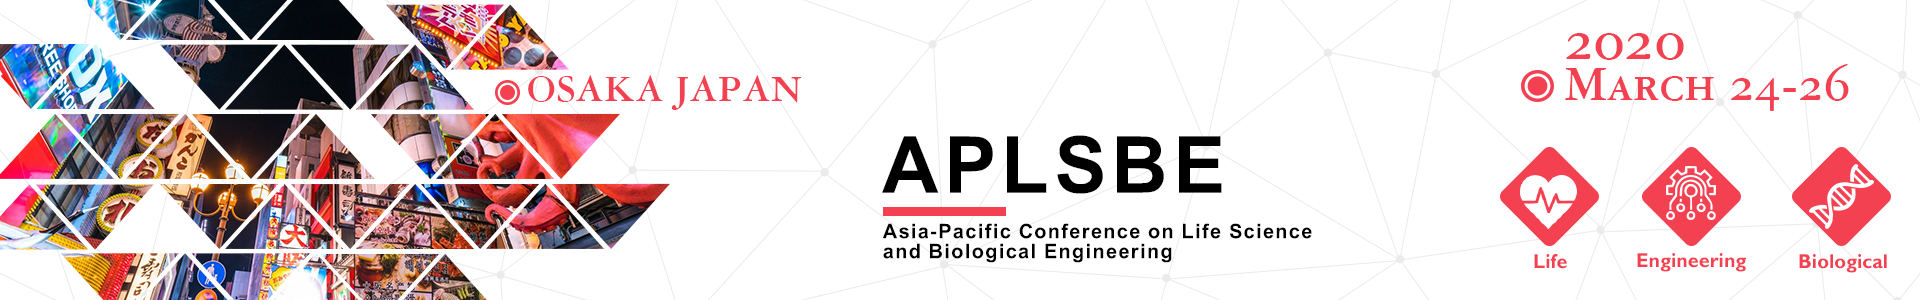 Asia-Pacific Conference on Life Sciences and Biological Engineering in Japan(APLSBE), Osaka, Japan